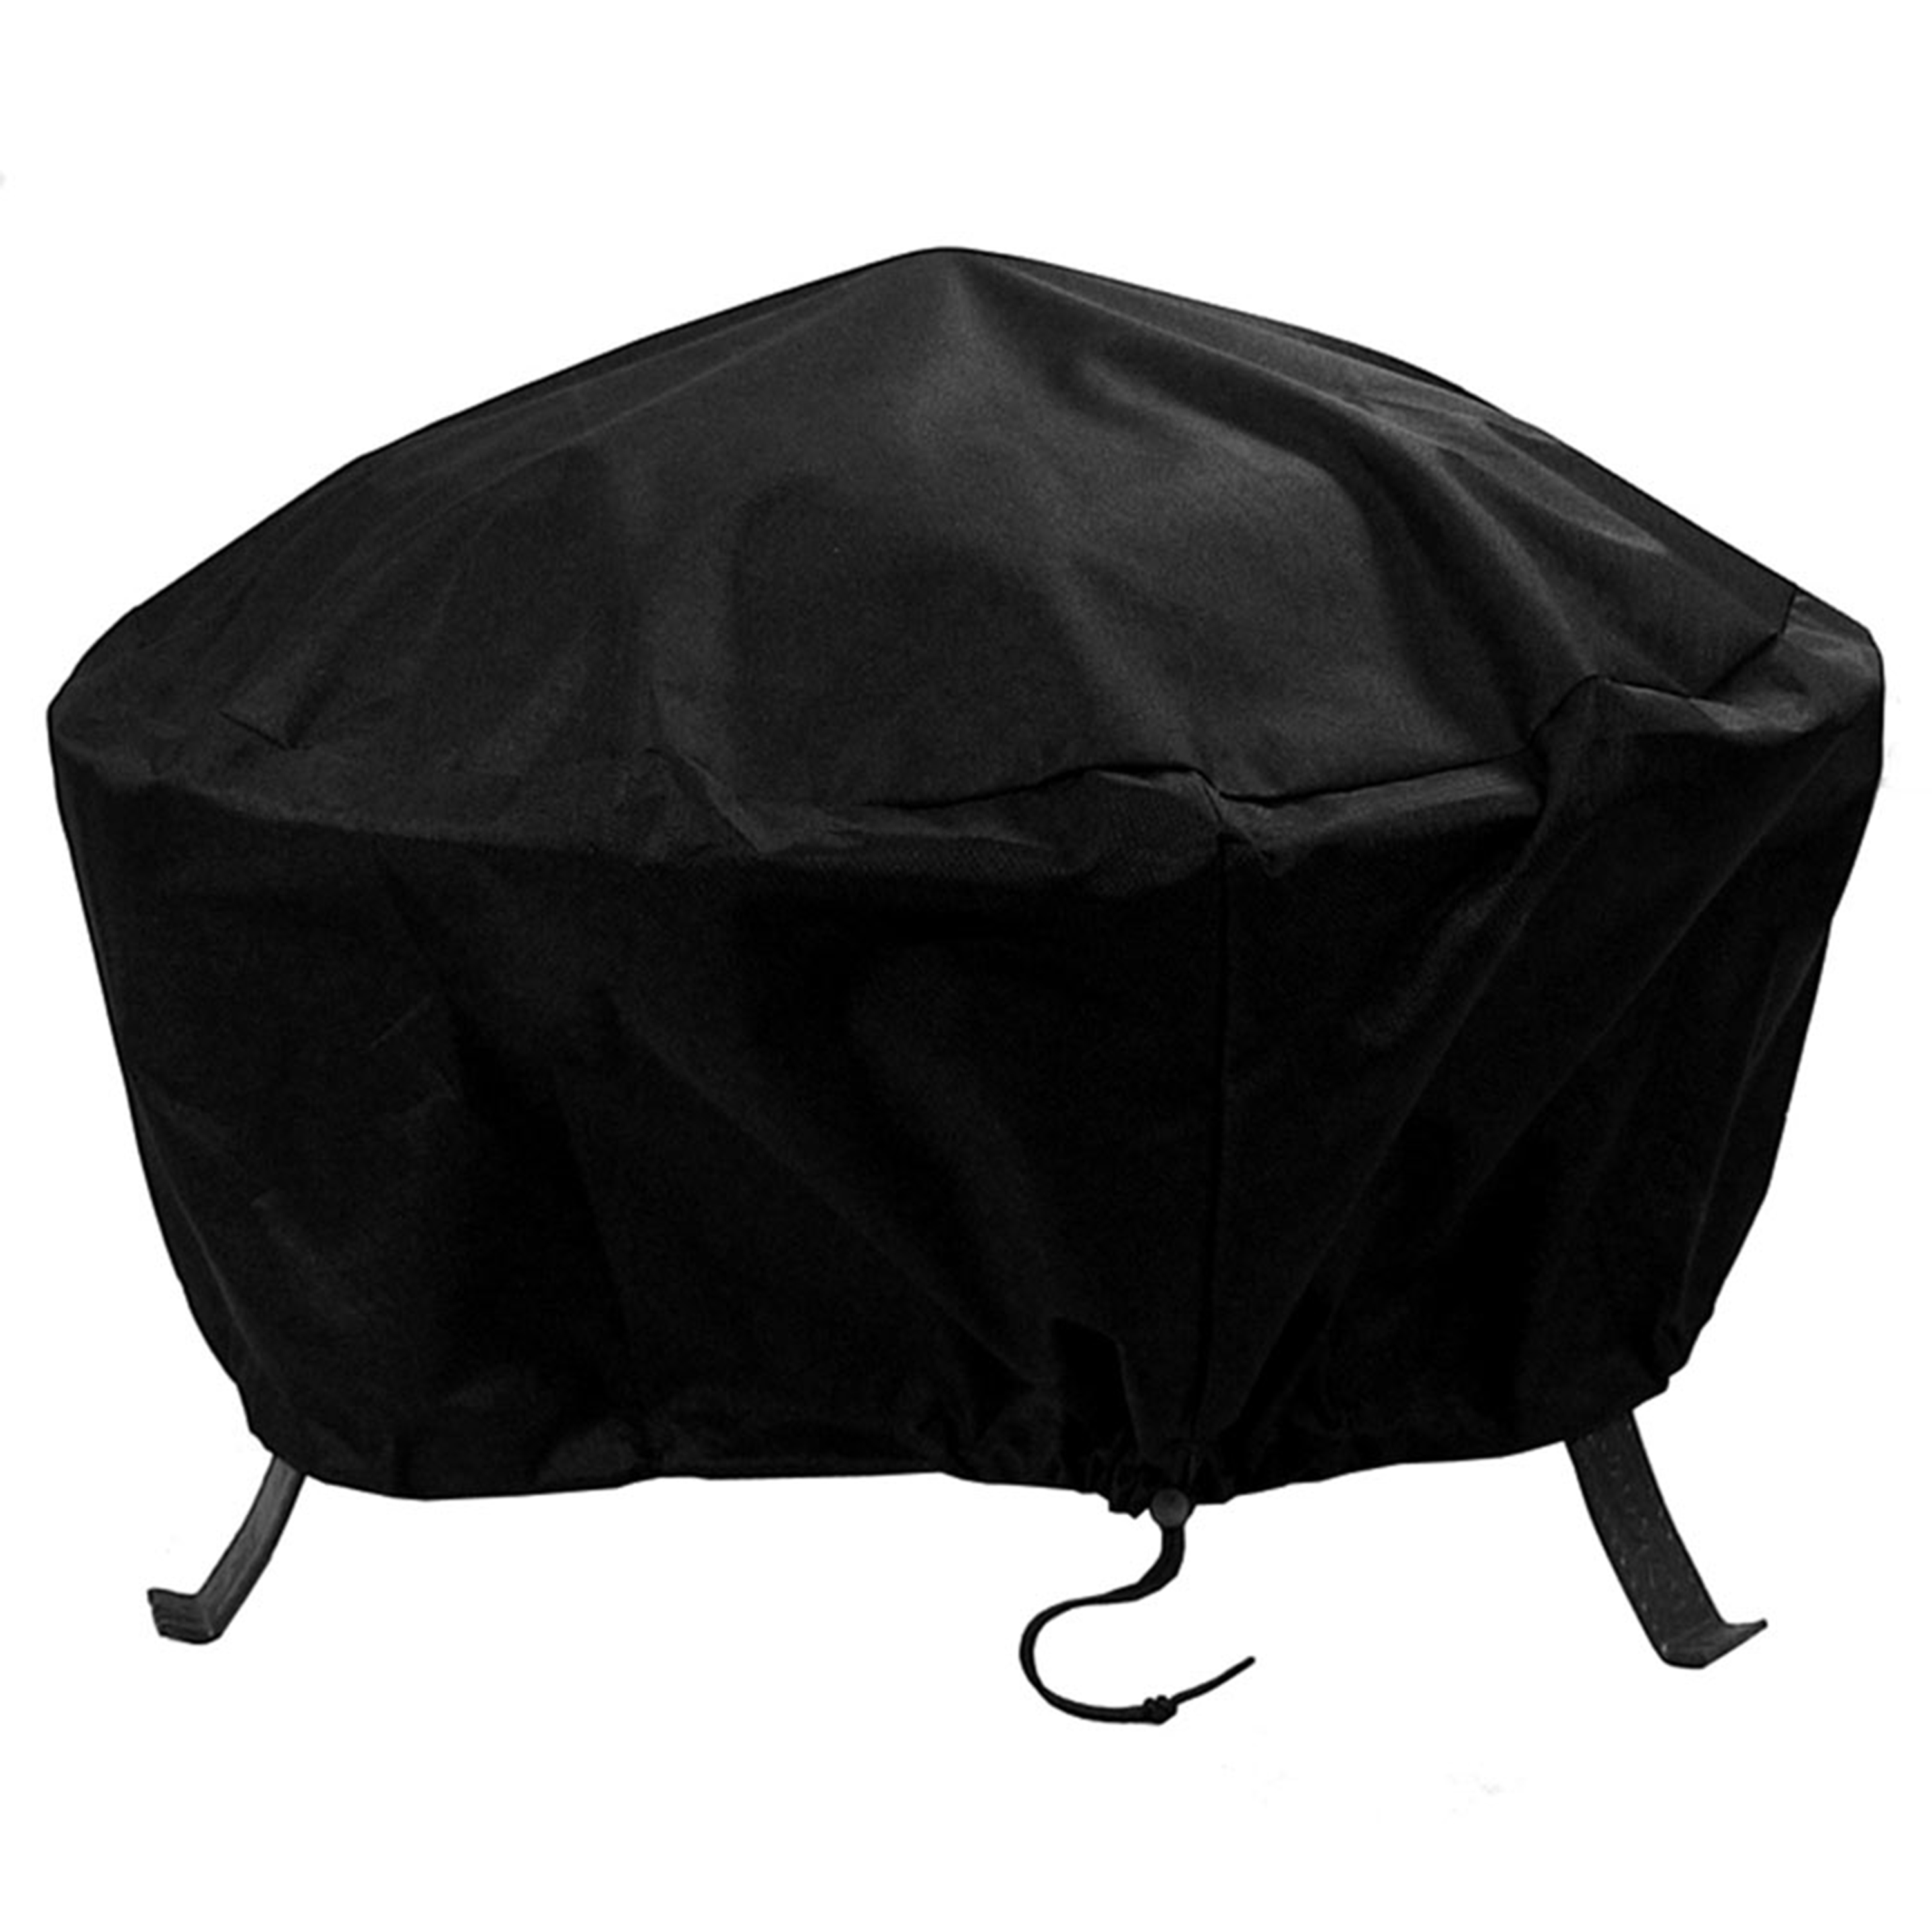 Sunnydaze Round Black Fire Pit Cover, Size Options Available, 36-inch Diameter